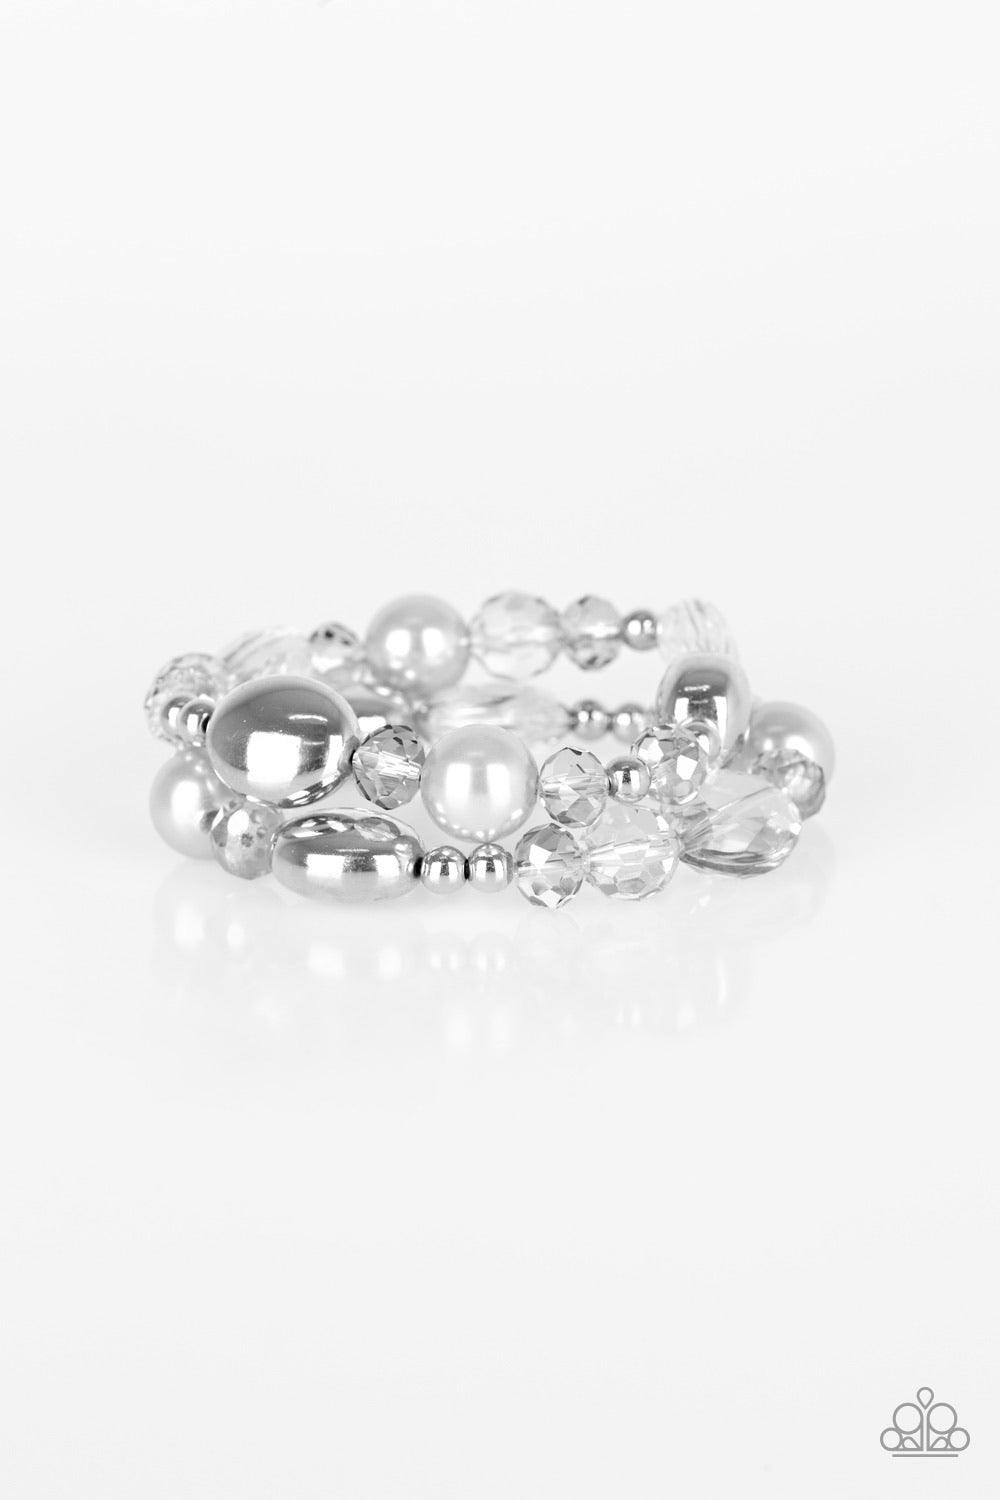 Paparazzi Accessories Downtown Dazzle - Silver An array of silver pearls, shiny silver beads, and smoky crystal-like beads are threaded along stretchy bands around the wrist for a refined look. Sold as one set of two bracelets. Jewelry